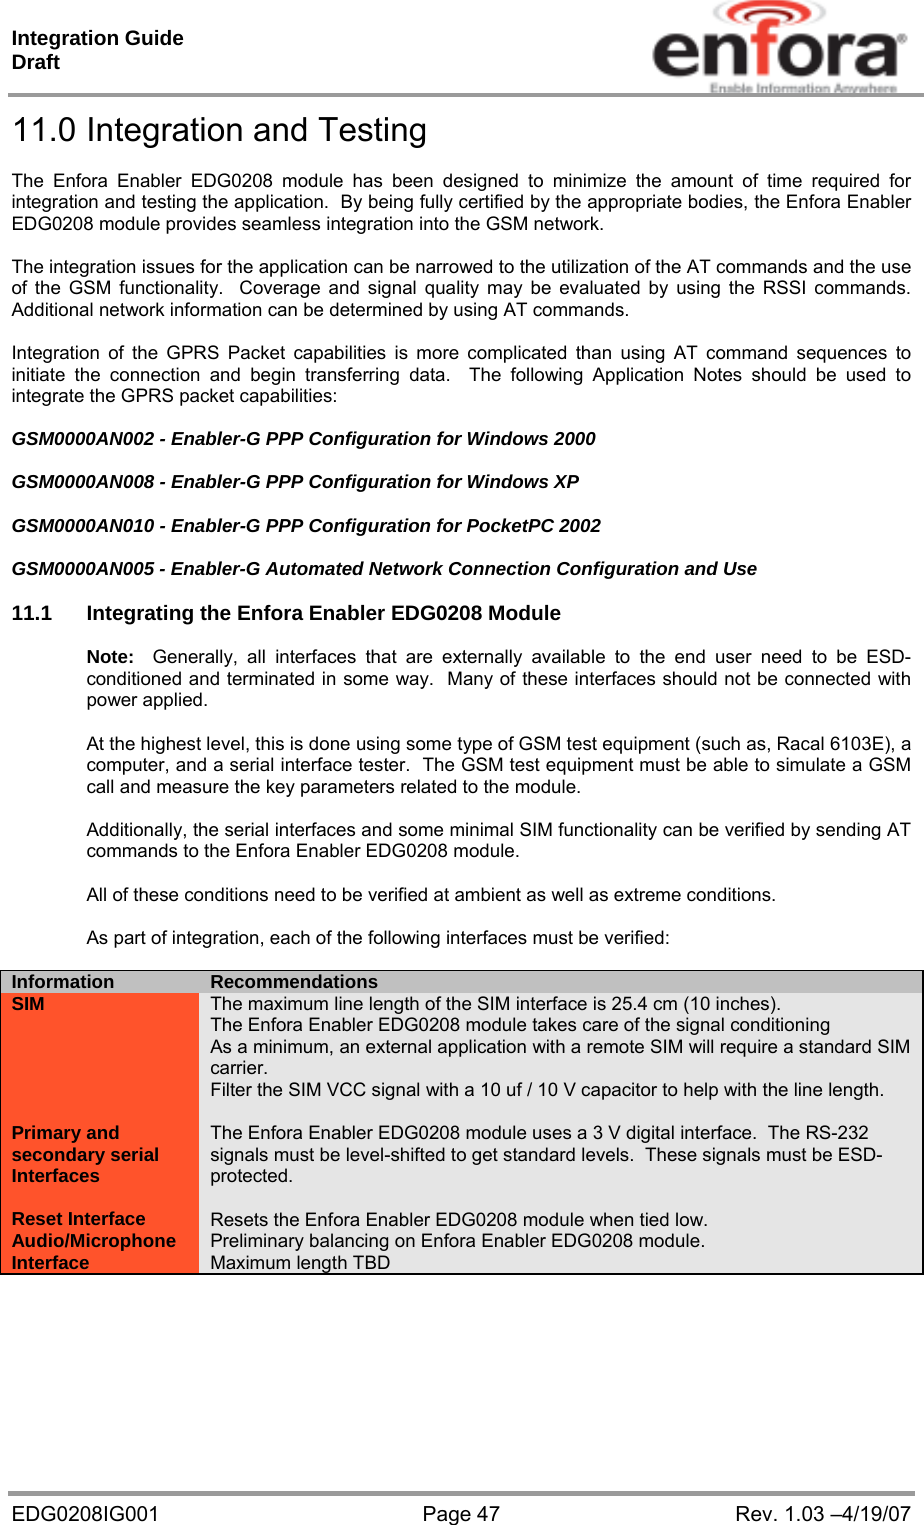 Integration Guide  Draft EDG0208IG001  Page 47  Rev. 1.03 –4/19/07 11.0 Integration and Testing  The Enfora Enabler EDG0208 module has been designed to minimize the amount of time required for integration and testing the application.  By being fully certified by the appropriate bodies, the Enfora Enabler EDG0208 module provides seamless integration into the GSM network.  The integration issues for the application can be narrowed to the utilization of the AT commands and the use of the GSM functionality.  Coverage and signal quality may be evaluated by using the RSSI commands.  Additional network information can be determined by using AT commands.  Integration of the GPRS Packet capabilities is more complicated than using AT command sequences to initiate the connection and begin transferring data.  The following Application Notes should be used to integrate the GPRS packet capabilities:  GSM0000AN002 - Enabler-G PPP Configuration for Windows 2000  GSM0000AN008 - Enabler-G PPP Configuration for Windows XP  GSM0000AN010 - Enabler-G PPP Configuration for PocketPC 2002  GSM0000AN005 - Enabler-G Automated Network Connection Configuration and Use  11.1  Integrating the Enfora Enabler EDG0208 Module  Note:  Generally, all interfaces that are externally available to the end user need to be ESD-conditioned and terminated in some way.  Many of these interfaces should not be connected with power applied.  At the highest level, this is done using some type of GSM test equipment (such as, Racal 6103E), a computer, and a serial interface tester.  The GSM test equipment must be able to simulate a GSM call and measure the key parameters related to the module.  Additionally, the serial interfaces and some minimal SIM functionality can be verified by sending AT commands to the Enfora Enabler EDG0208 module.  All of these conditions need to be verified at ambient as well as extreme conditions.  As part of integration, each of the following interfaces must be verified:  Information  RecommendationsSIM  The maximum line length of the SIM interface is 25.4 cm (10 inches). The Enfora Enabler EDG0208 module takes care of the signal conditioning As a minimum, an external application with a remote SIM will require a standard SIM carrier. Filter the SIM VCC signal with a 10 uf / 10 V capacitor to help with the line length.  Primary and secondary serial Interfaces The Enfora Enabler EDG0208 module uses a 3 V digital interface.  The RS-232 signals must be level-shifted to get standard levels.  These signals must be ESD-protected.  Reset Interface  Resets the Enfora Enabler EDG0208 module when tied low. Audio/Microphone Interface  Preliminary balancing on Enfora Enabler EDG0208 module. Maximum length TBD  